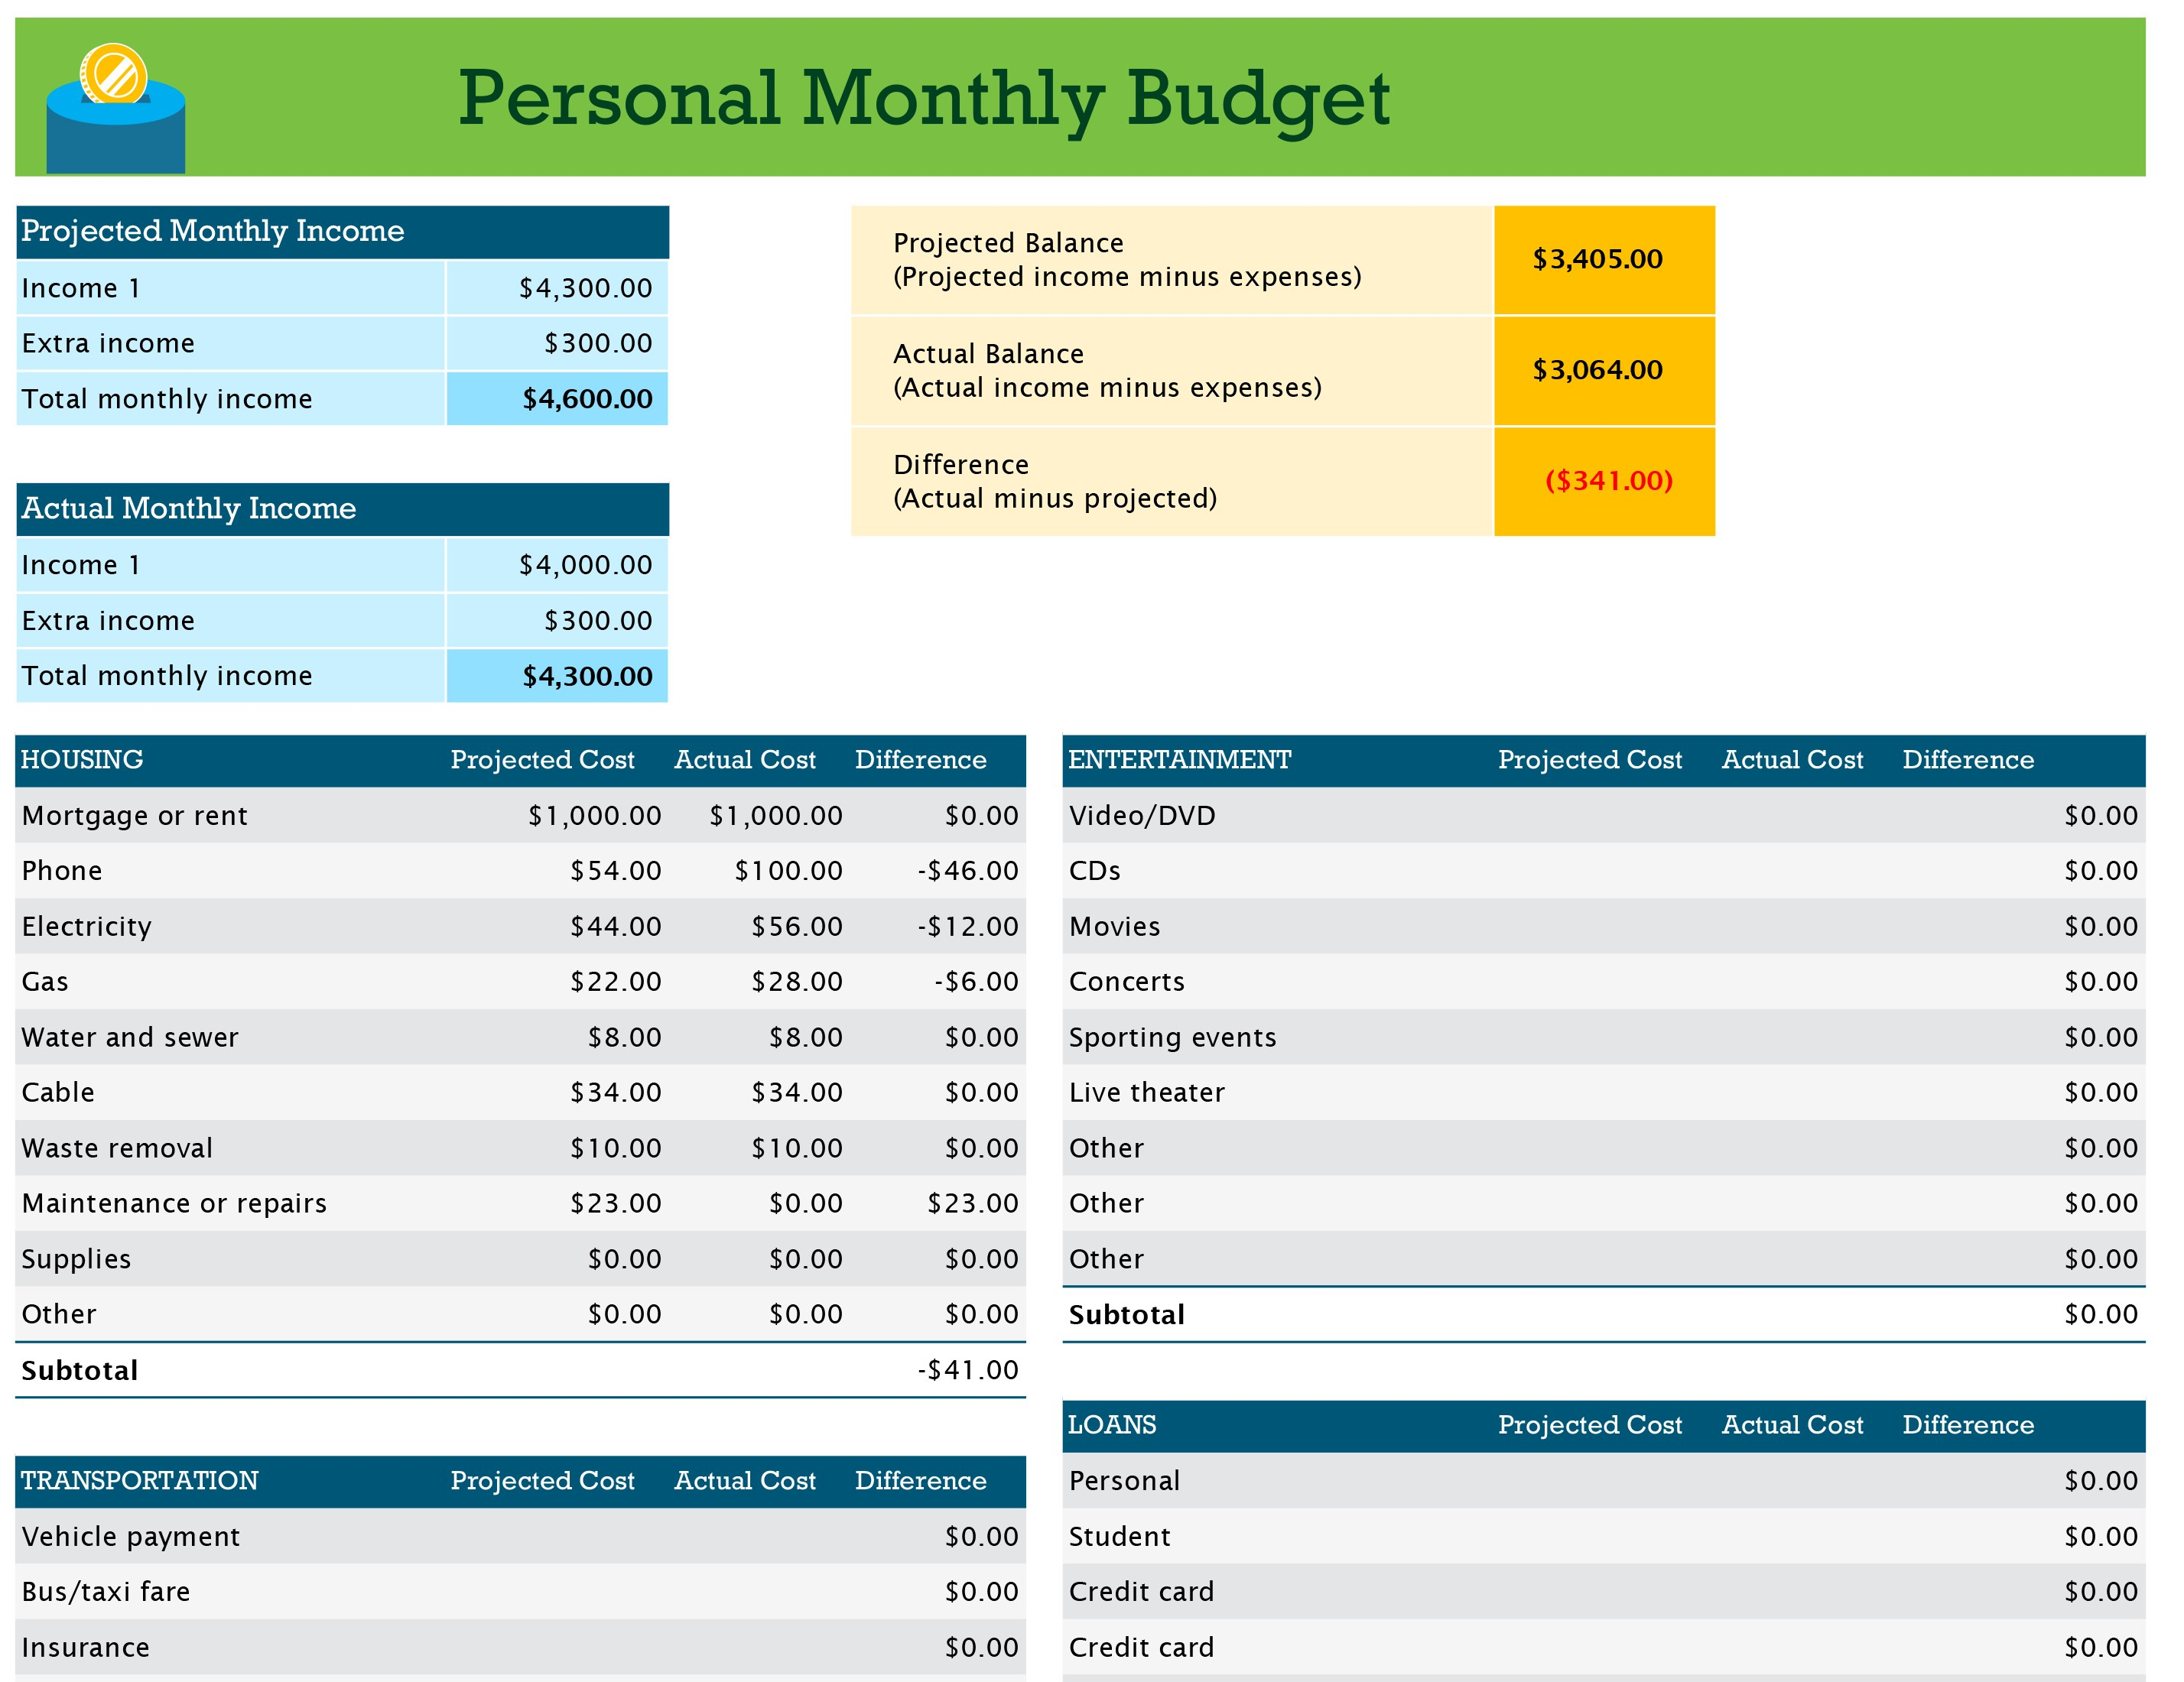 Personal Monthly Budget Spreadsheet With Regard To Personal Monthly Budget